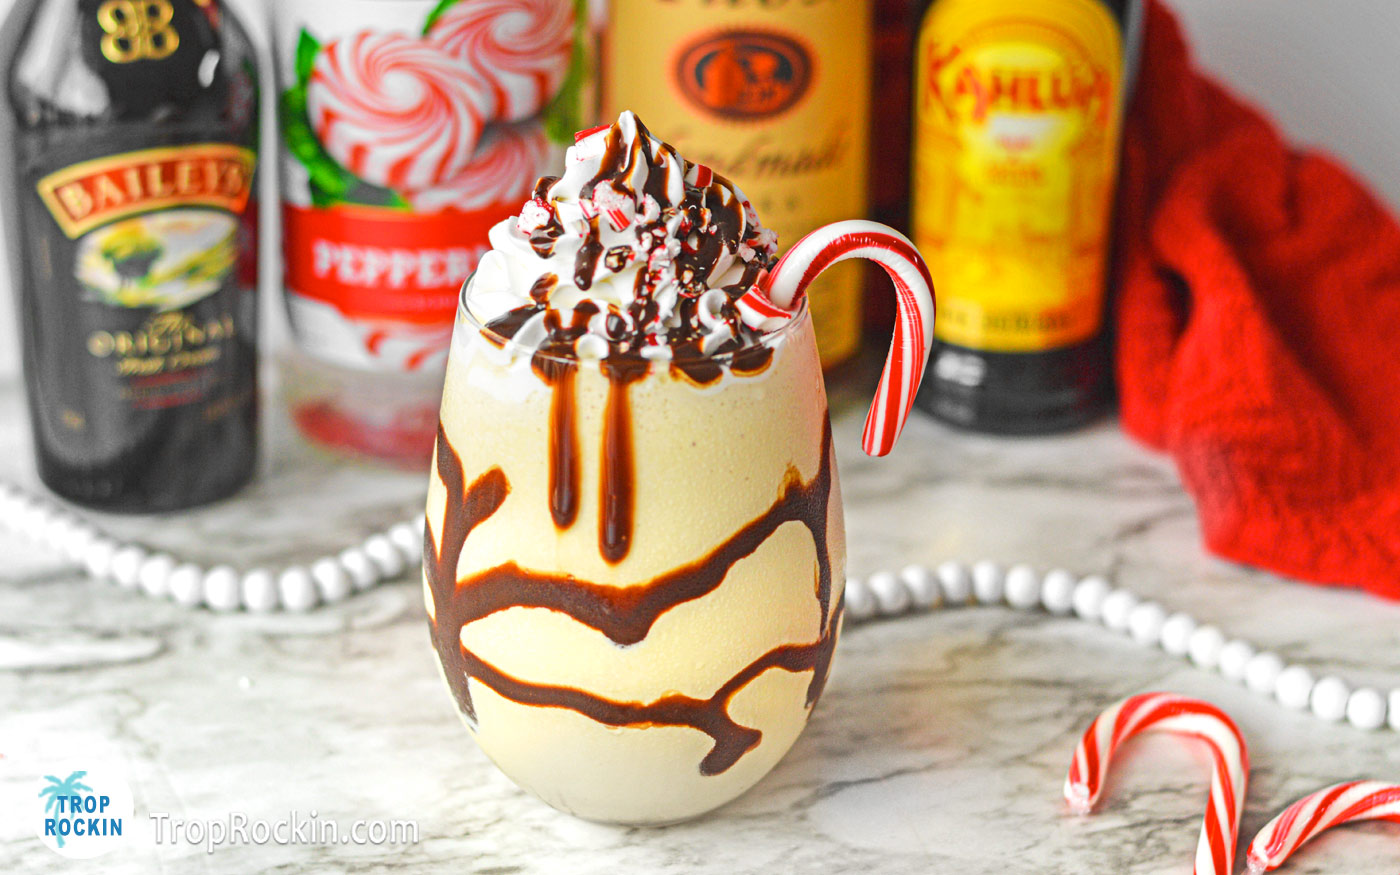 Peppermint Mudslide drink with liquor bottles in the background.